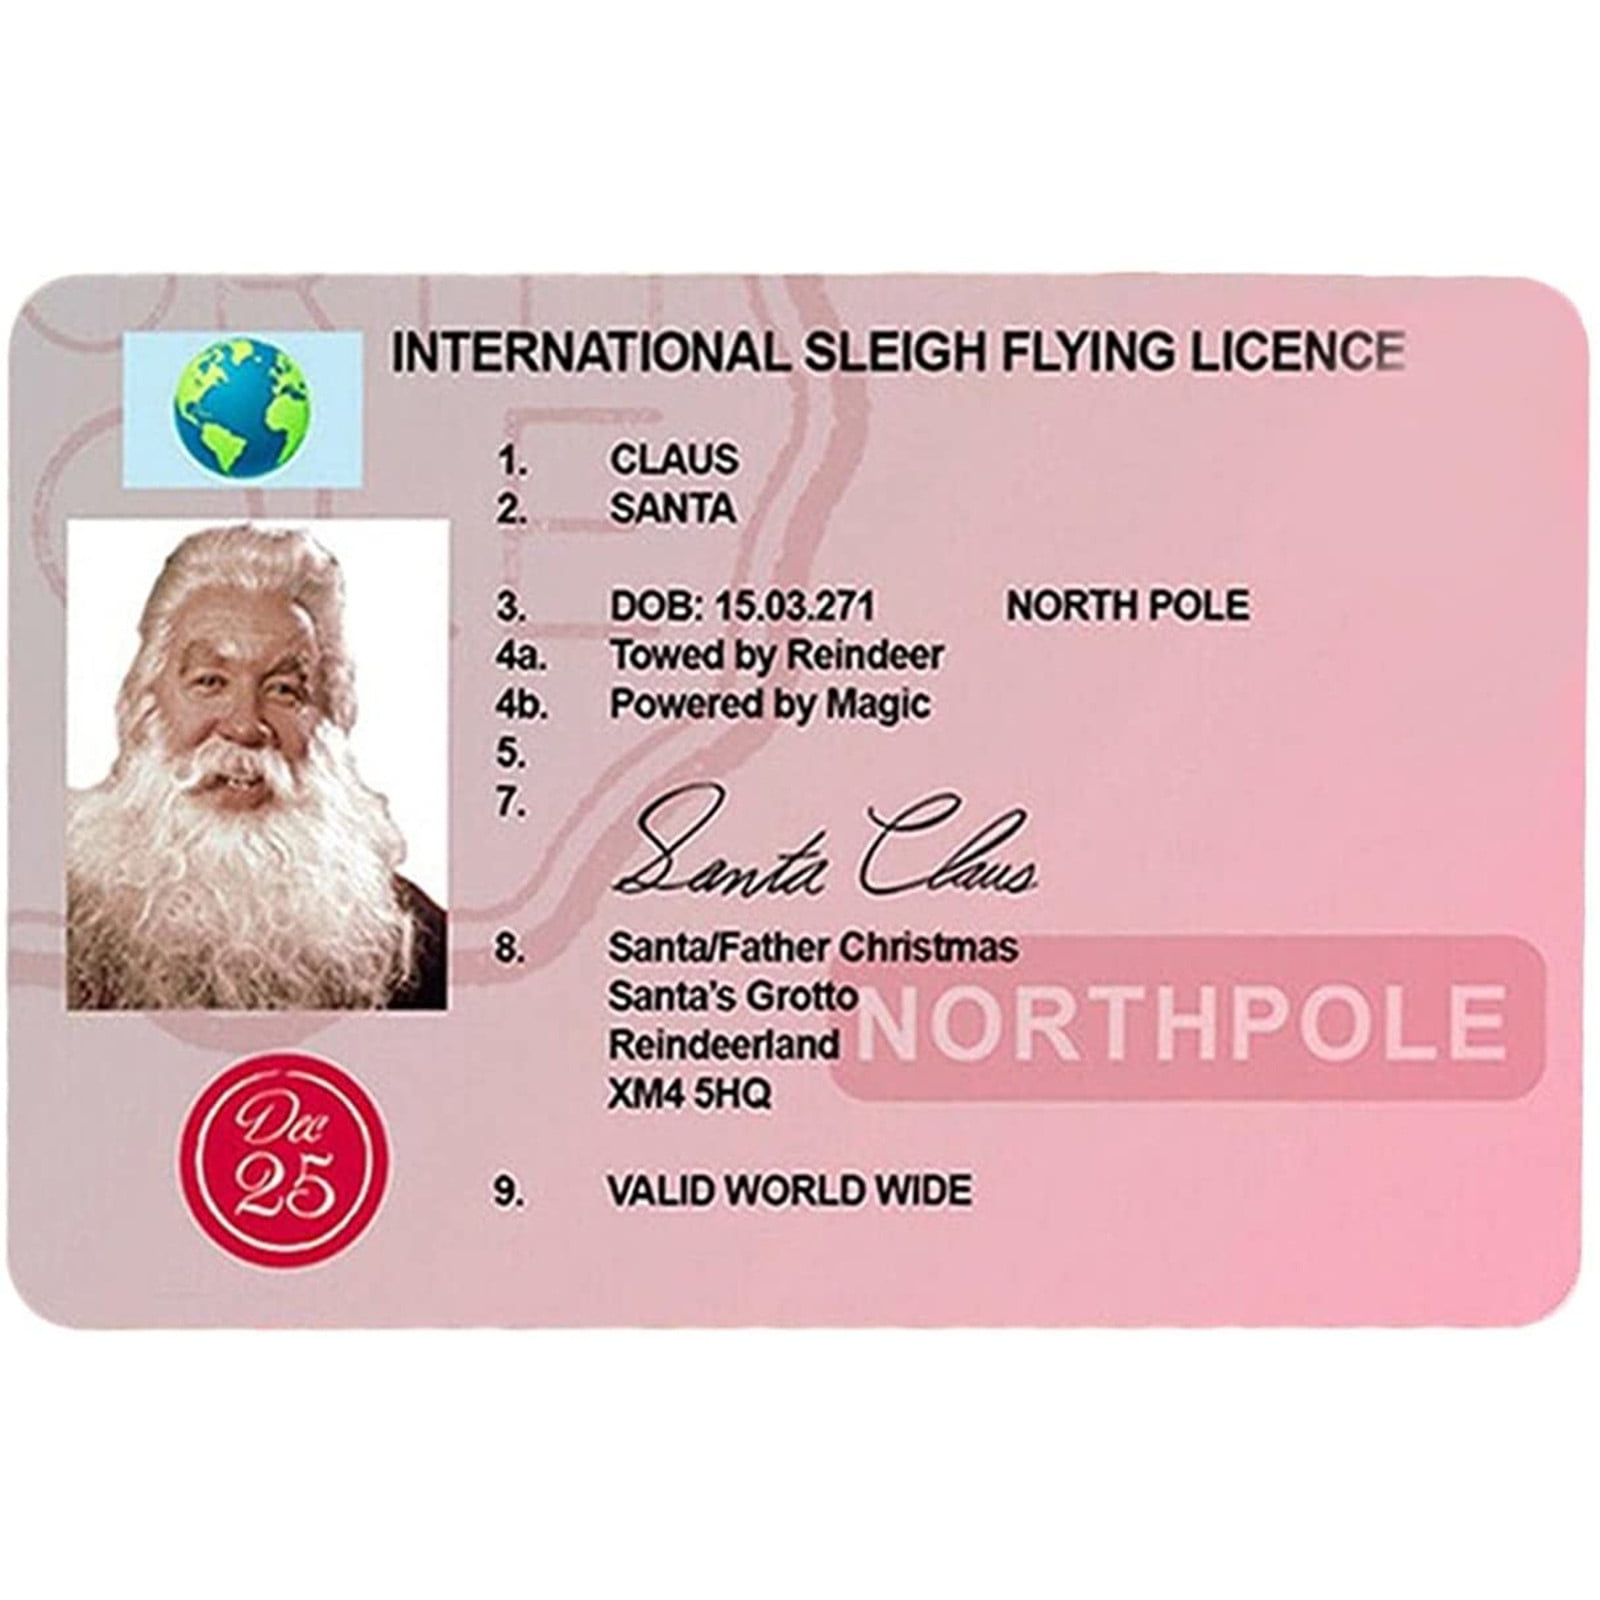 Santa Claus Lost Driving/Sleigh Licence